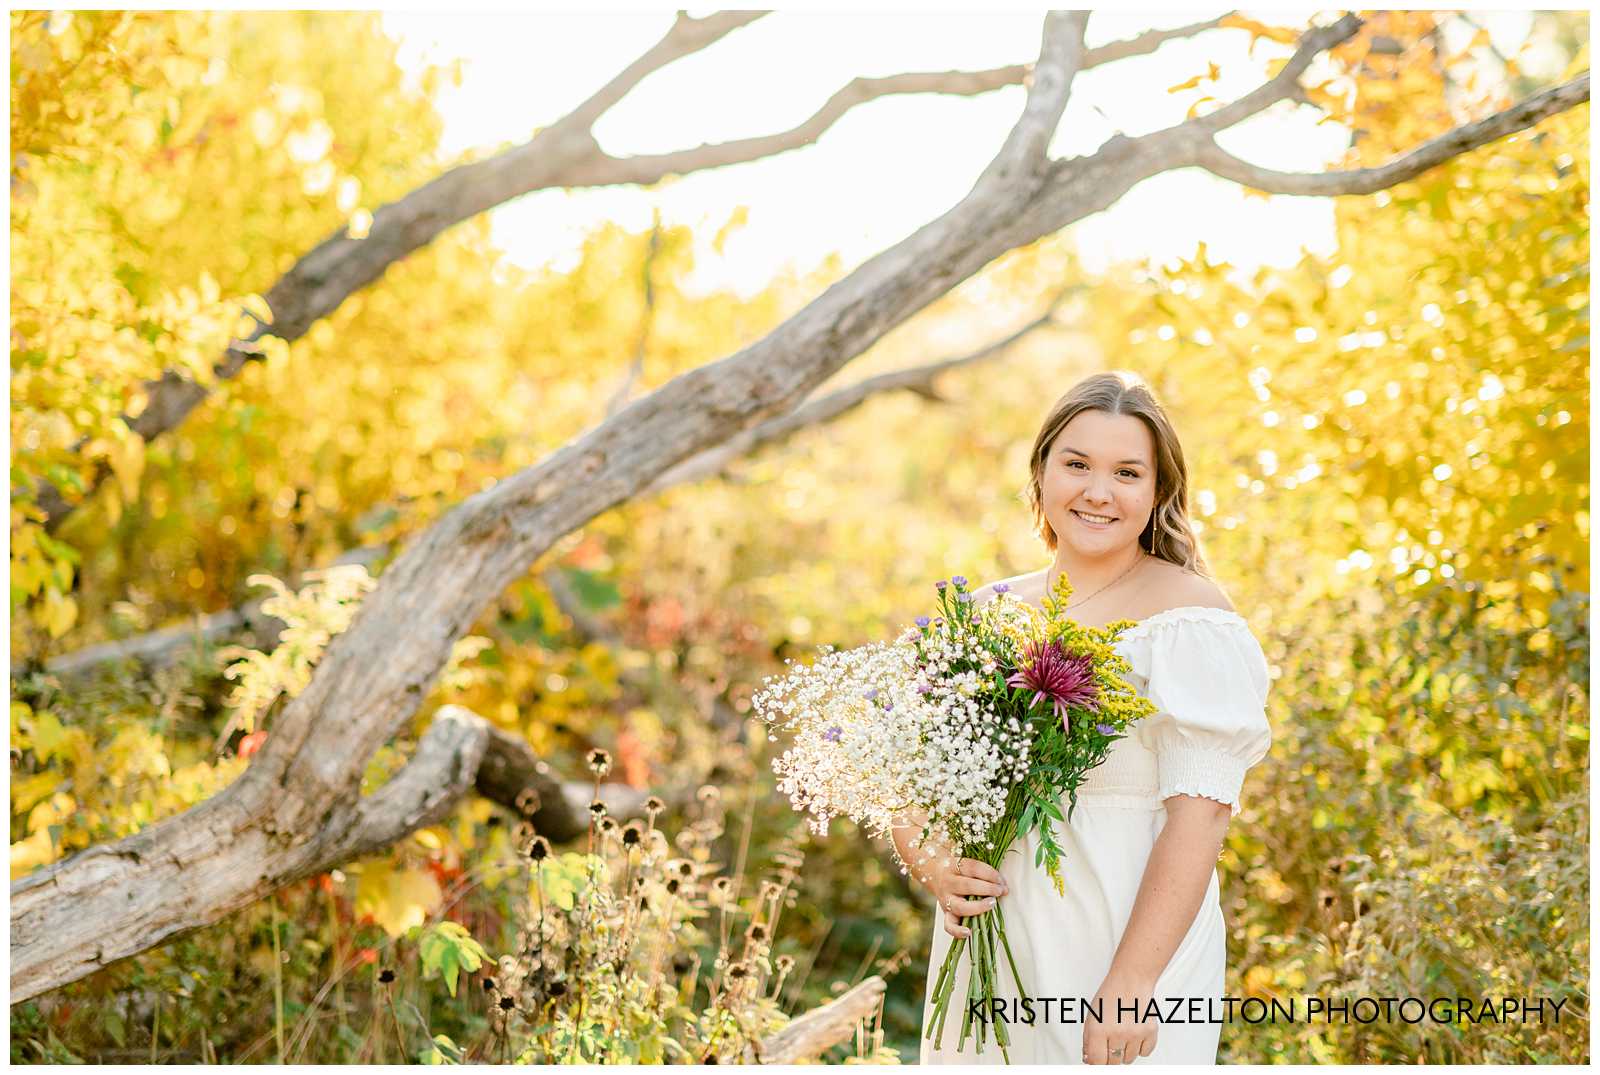 High school senior girl wearing a white dress and holding a bouquet of wildflowers